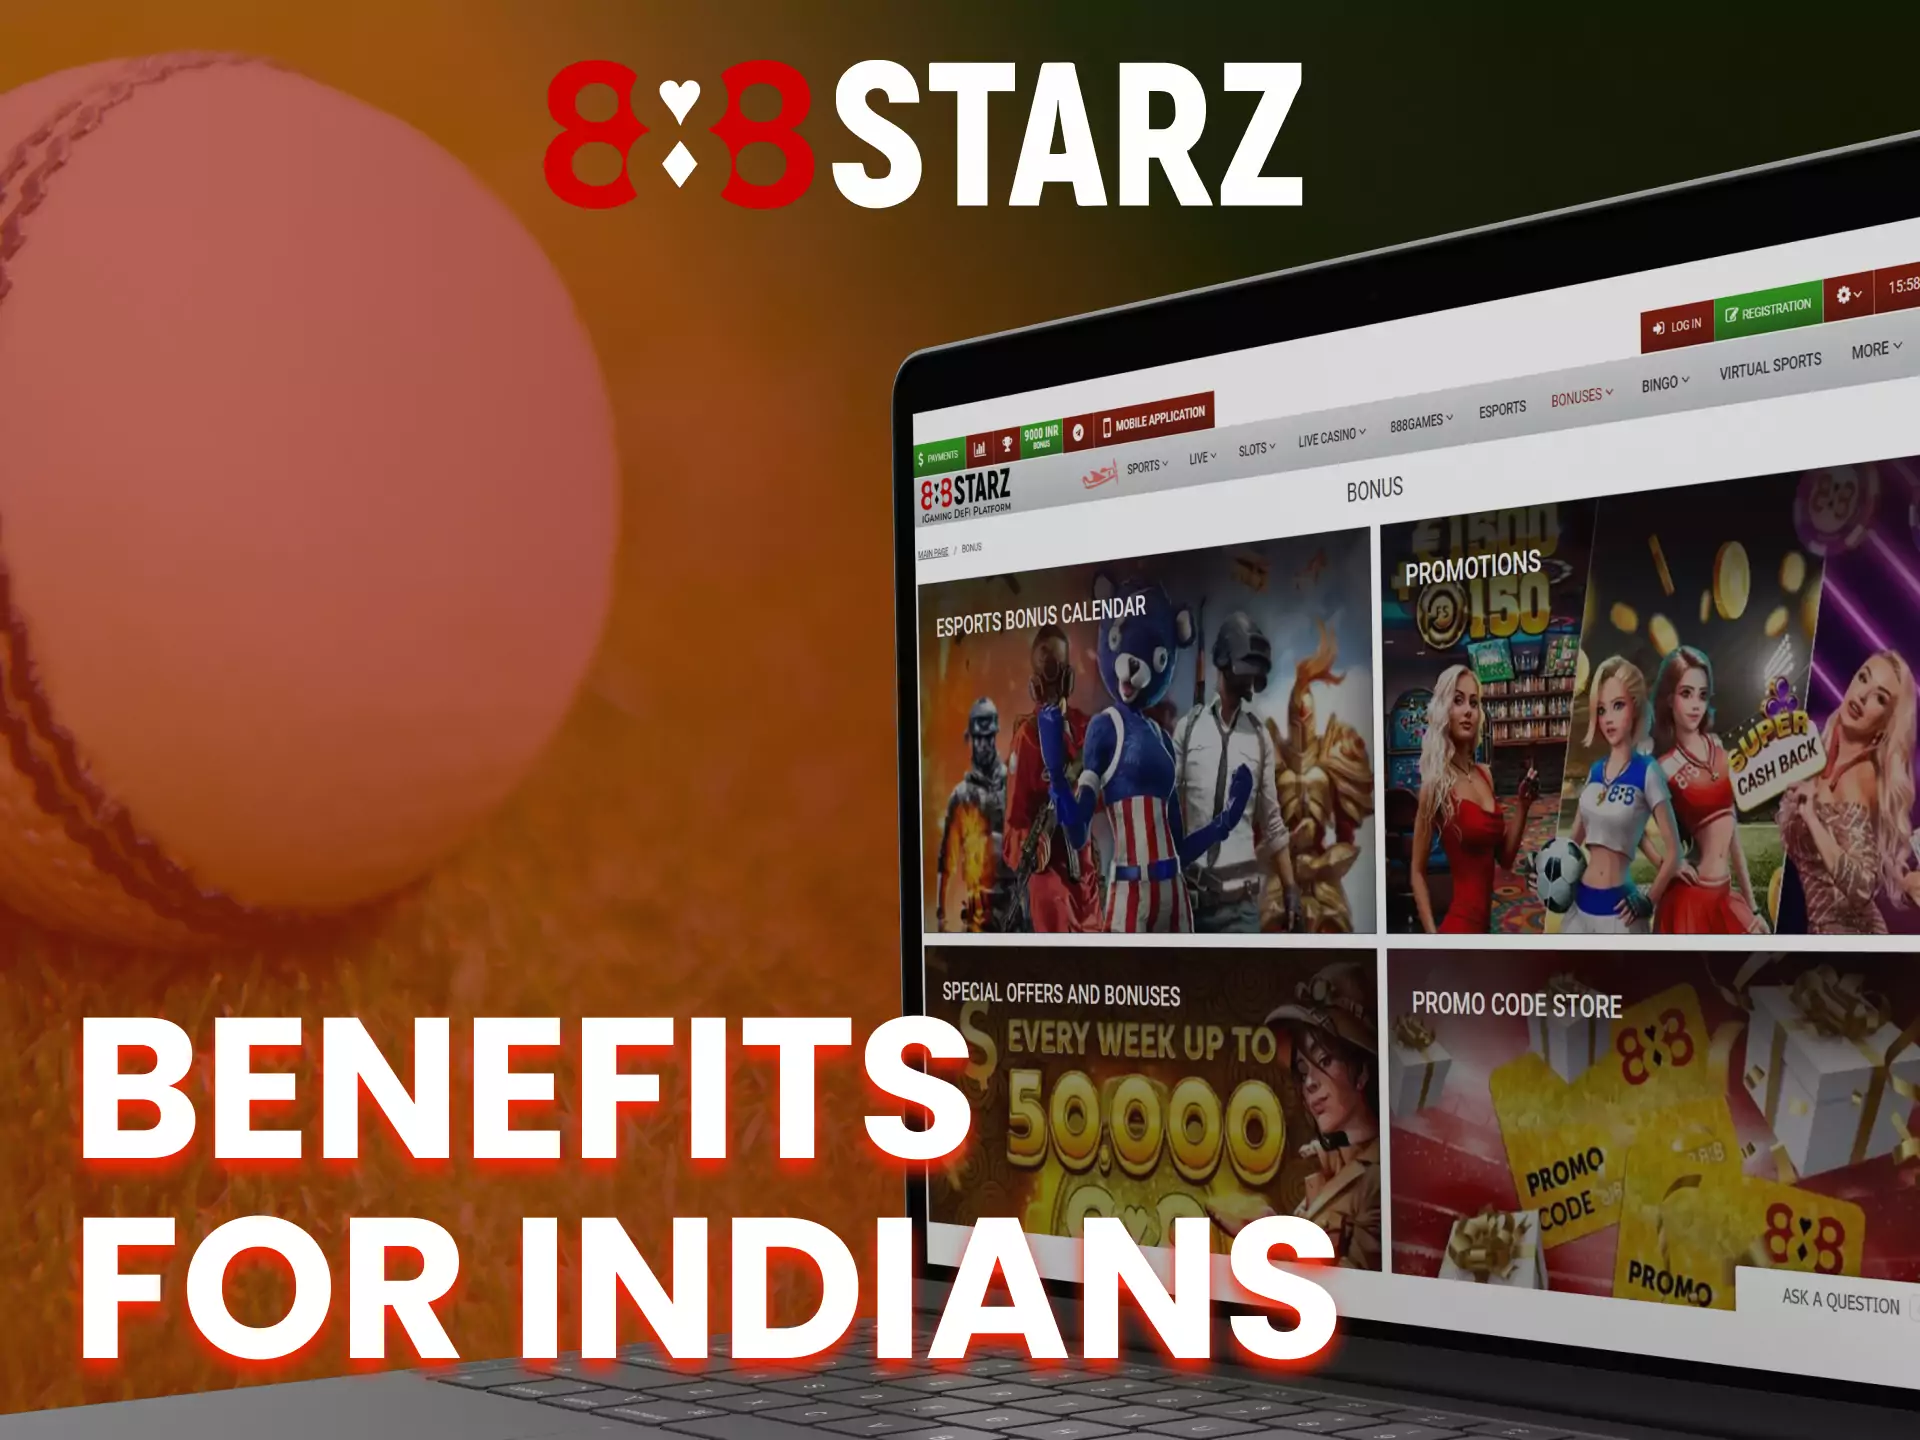 Get your special 888starz bonus if you bet from India.